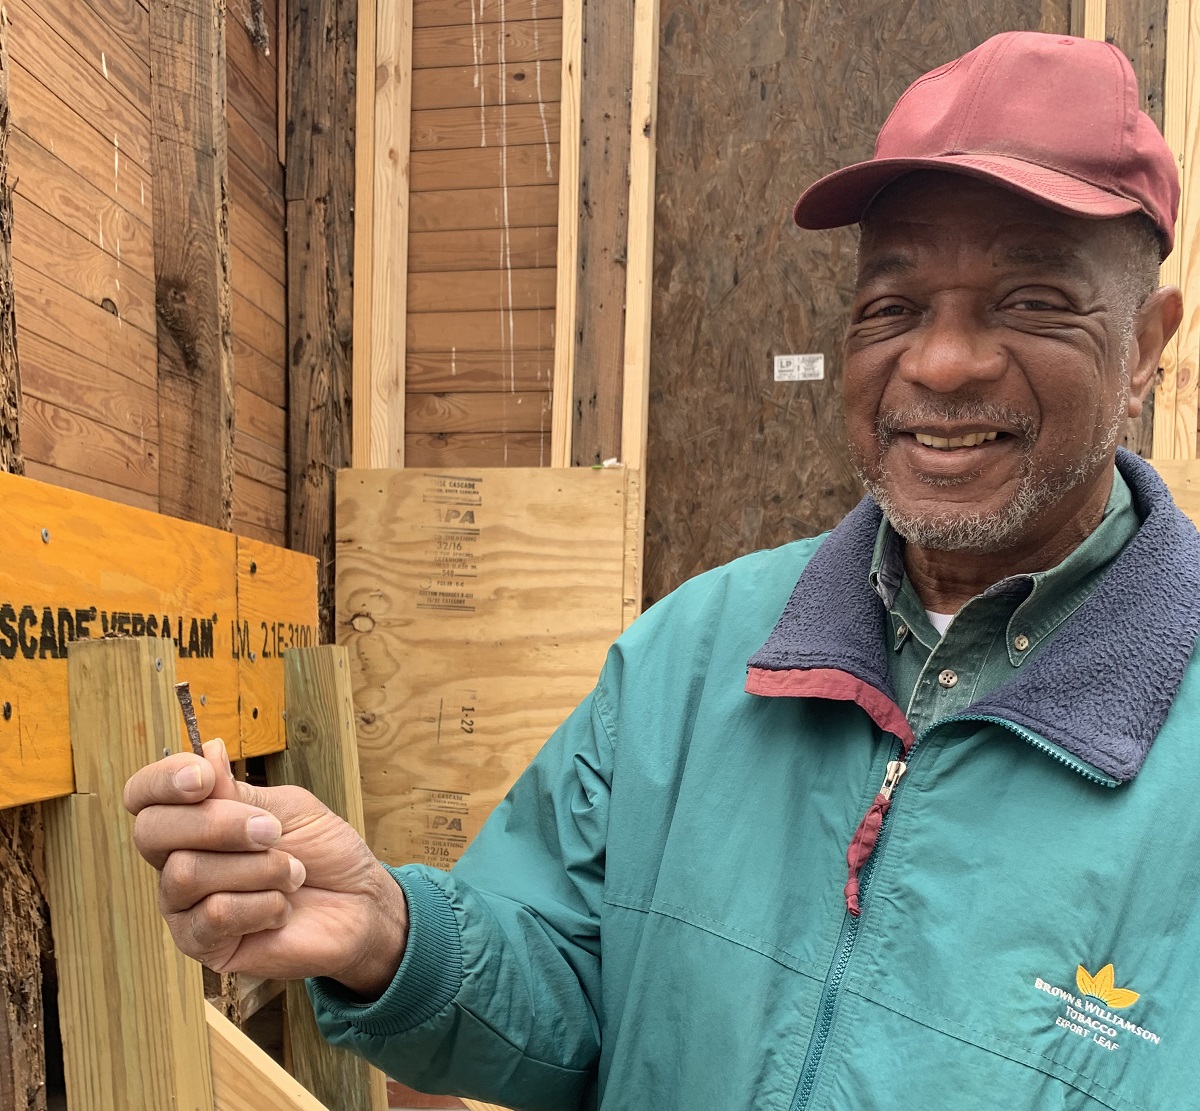 Al Beatty, president of the Cedar Hill/West Bank Heritage Foundation, holds an old nail pulled from a rotted area of wood framing Reaves Chapel. The chapel was built in the mid-1800s by former enslaved people on the Cedar Hill Plantation and other nearby plantations.